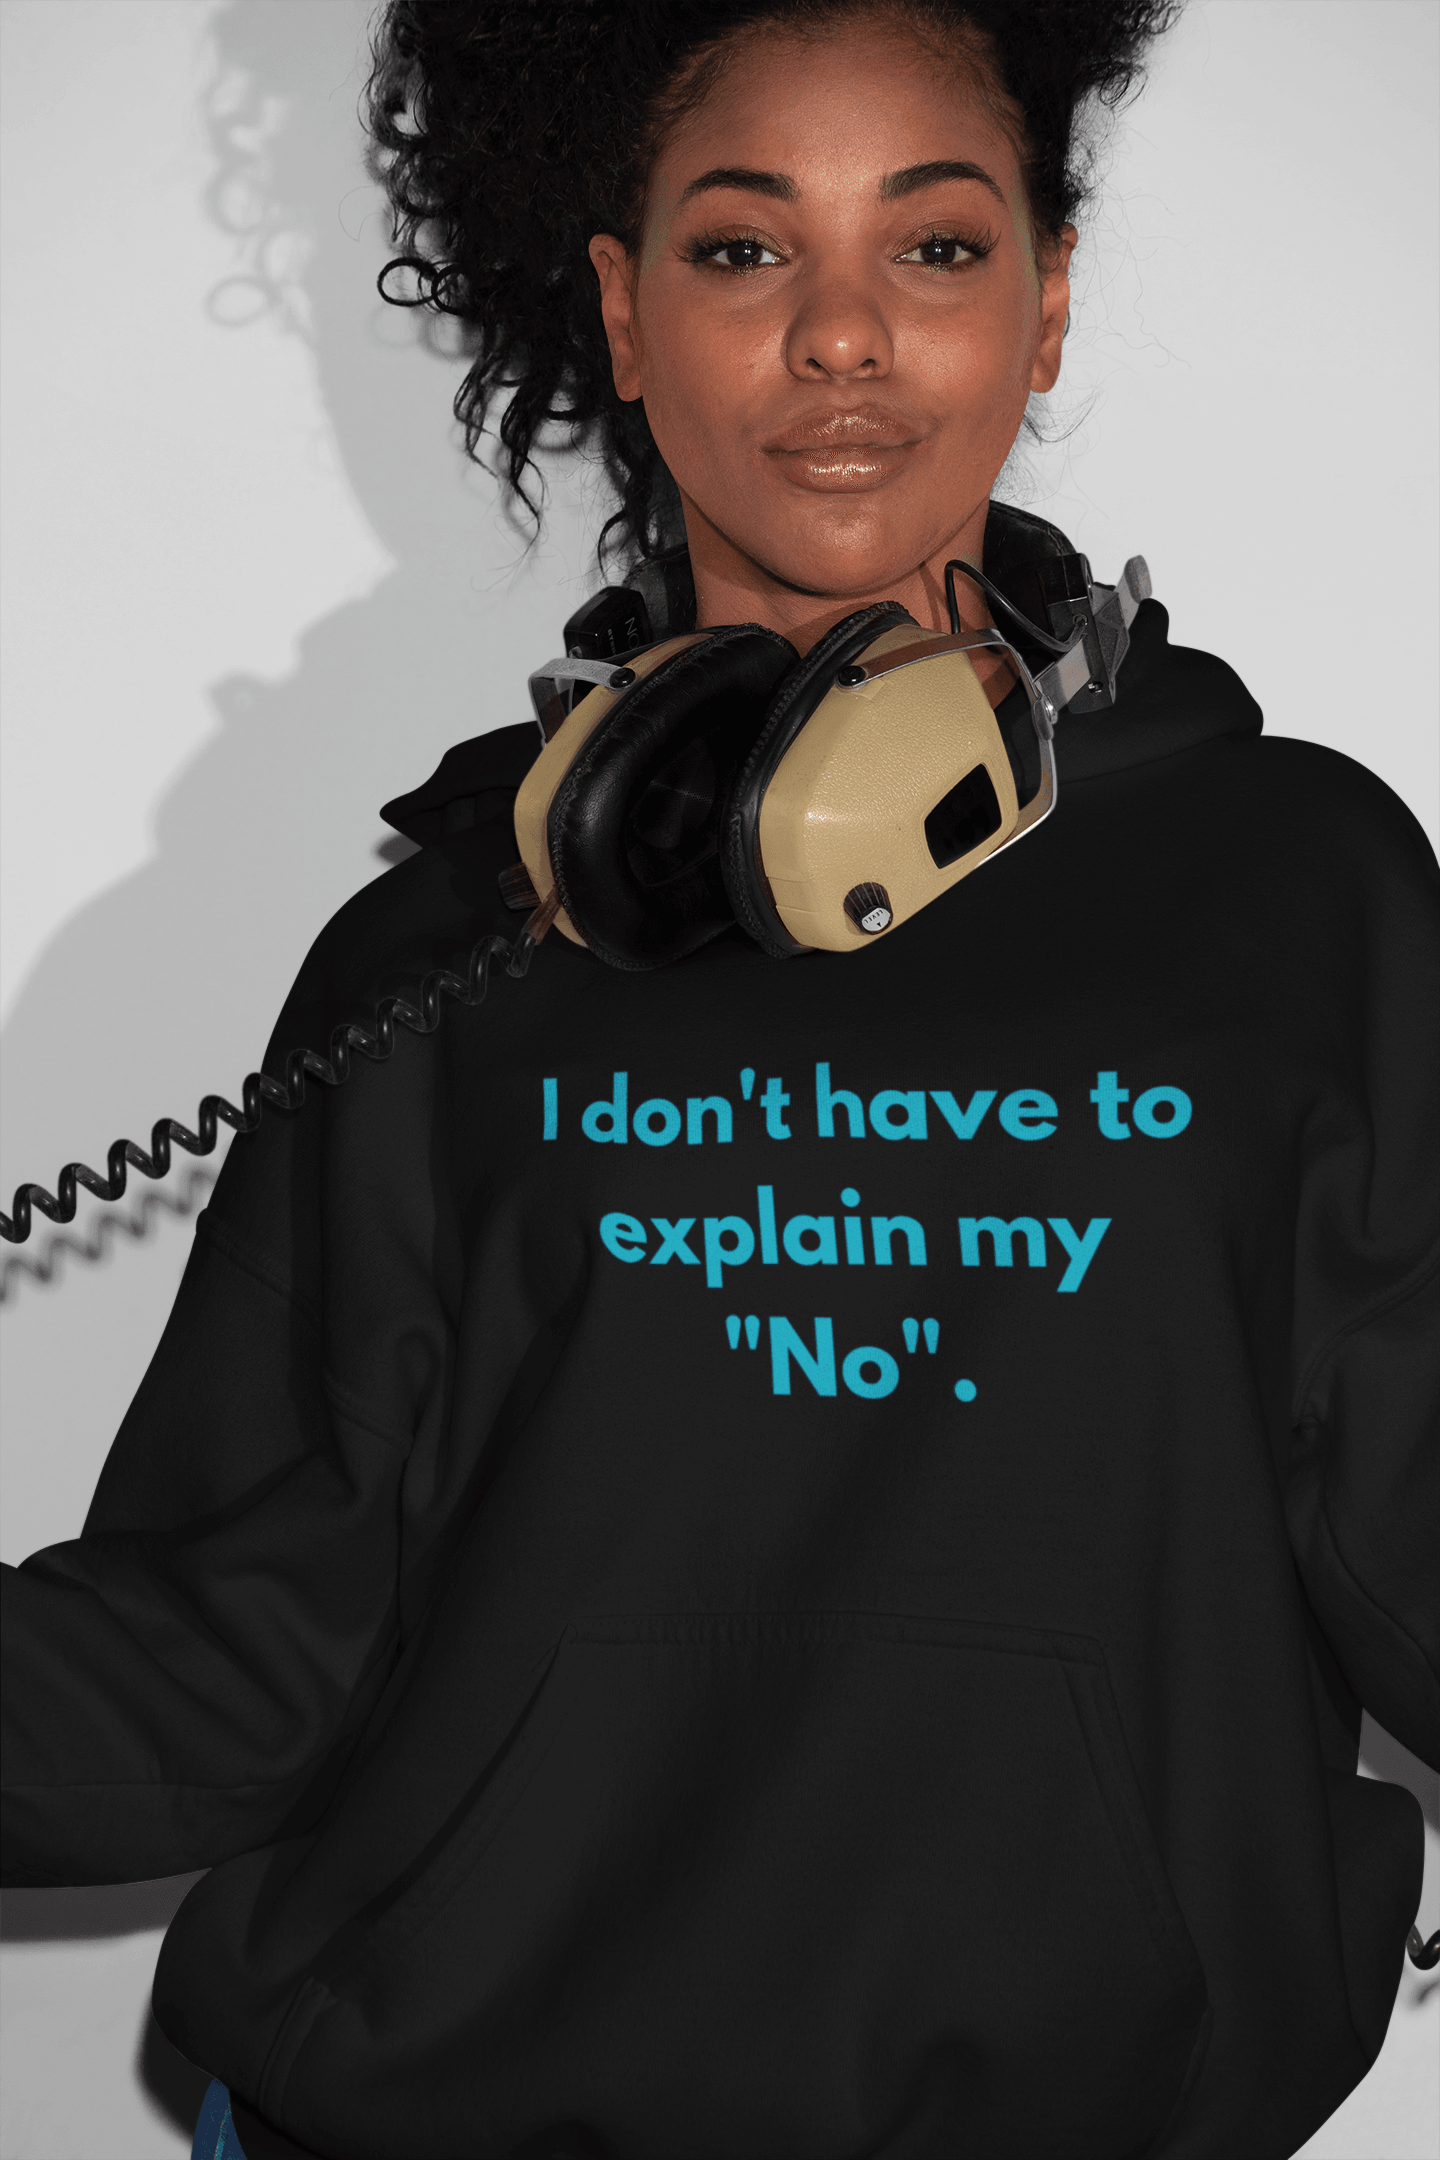 I Don't Have to Explain My "No" Hoodie - Sharp Tact Kreativ | Tees & Gifts with Encouraging Messages to Brighten Your Day with a Bit of Wit